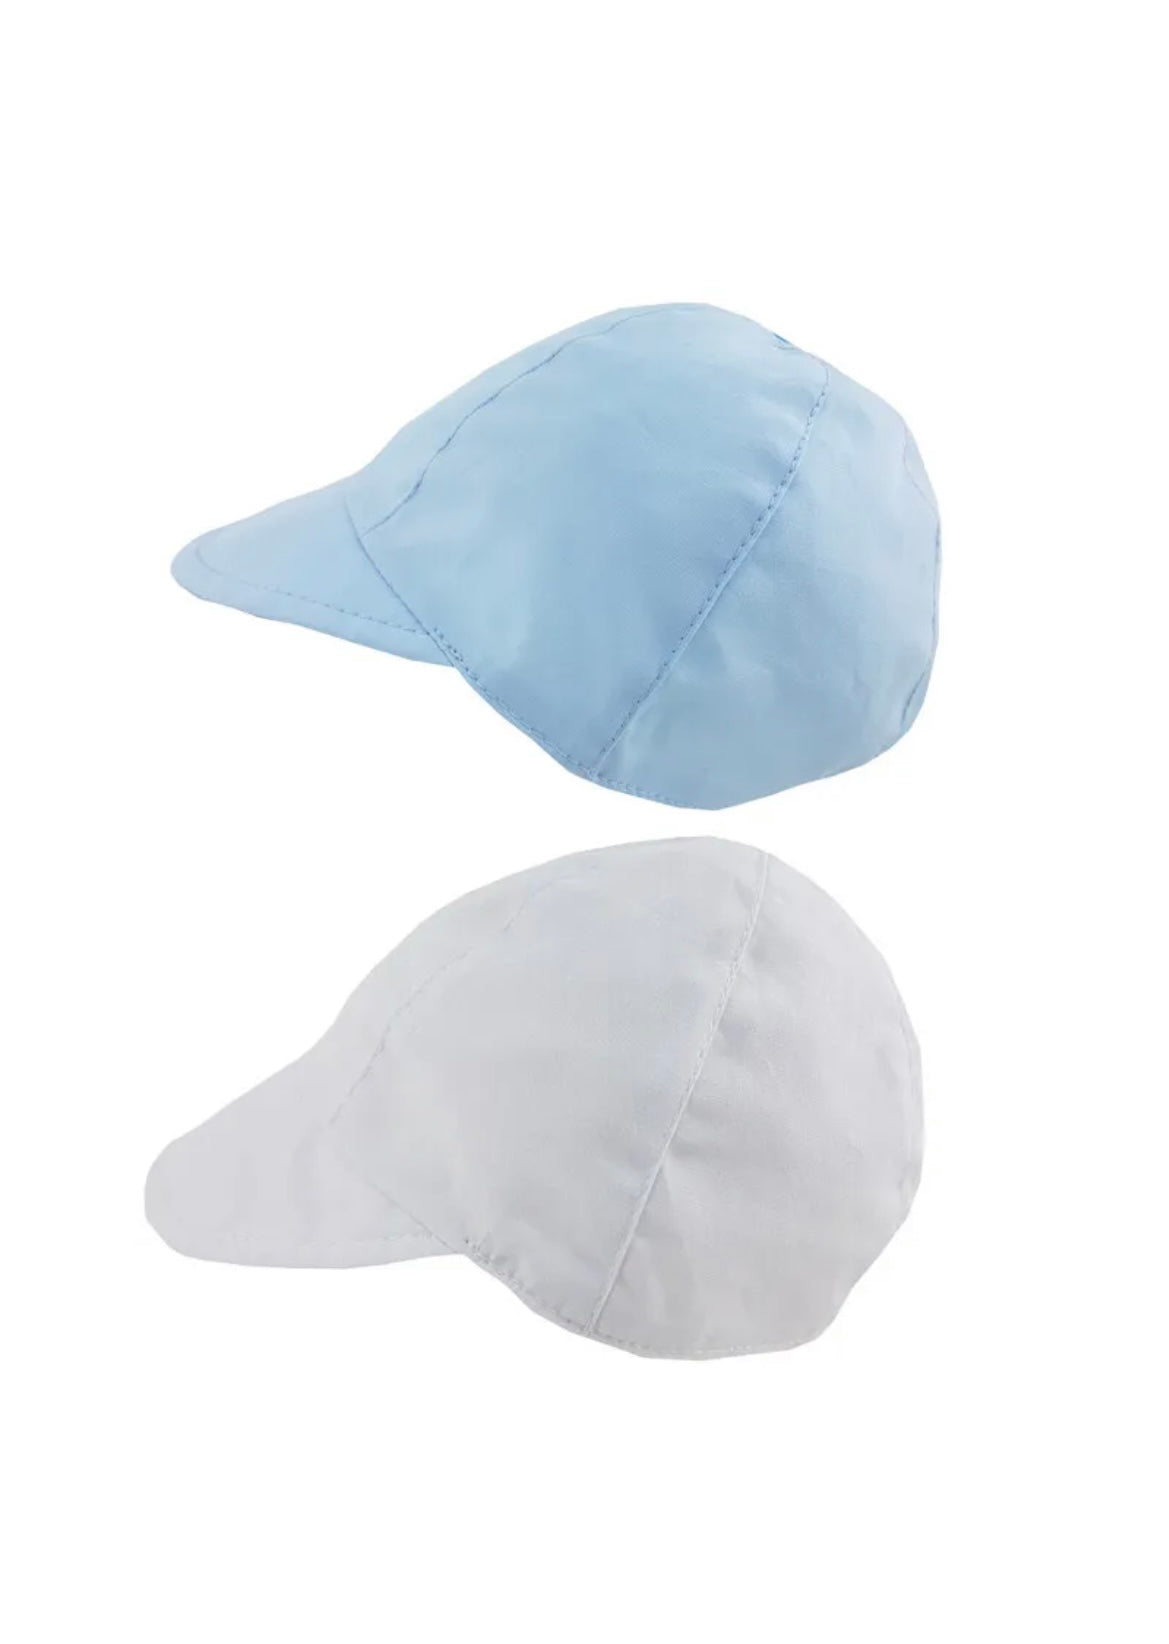 Boy 0-18 months blue or white summer caps - PESCI BABY